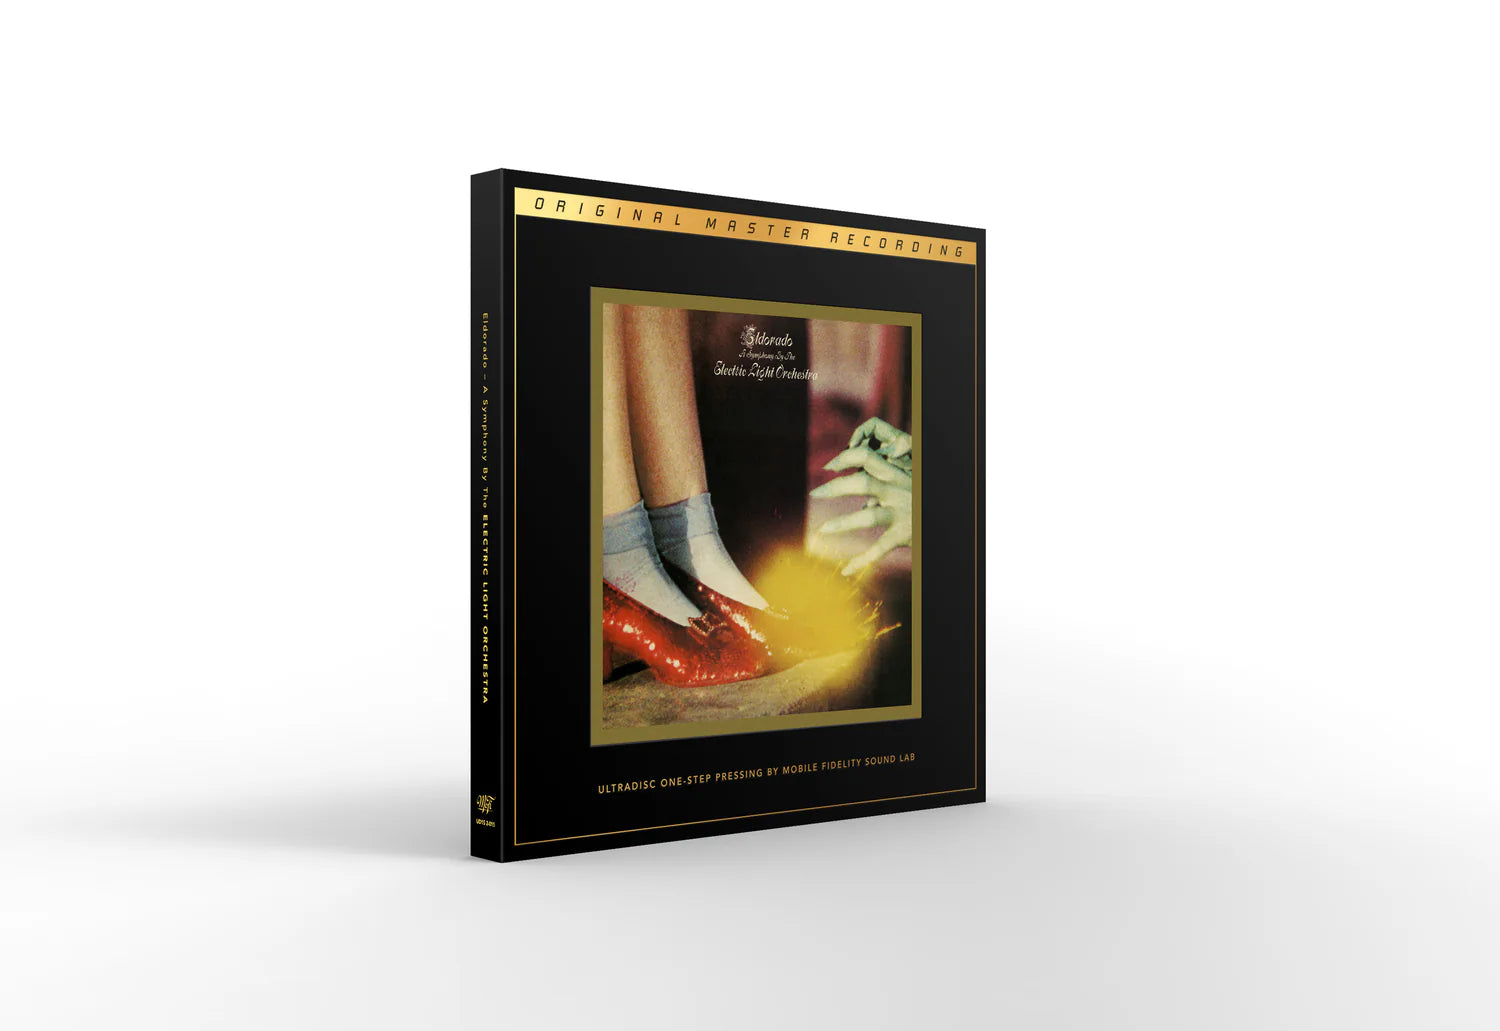 ELECTRIC LIGHT ORCHESTRA - Eldorado (Mobile Fidelity Numbered Edition) - 2LP (45Rpm) - 180g SuperVinyl Box Set [MAY 3]